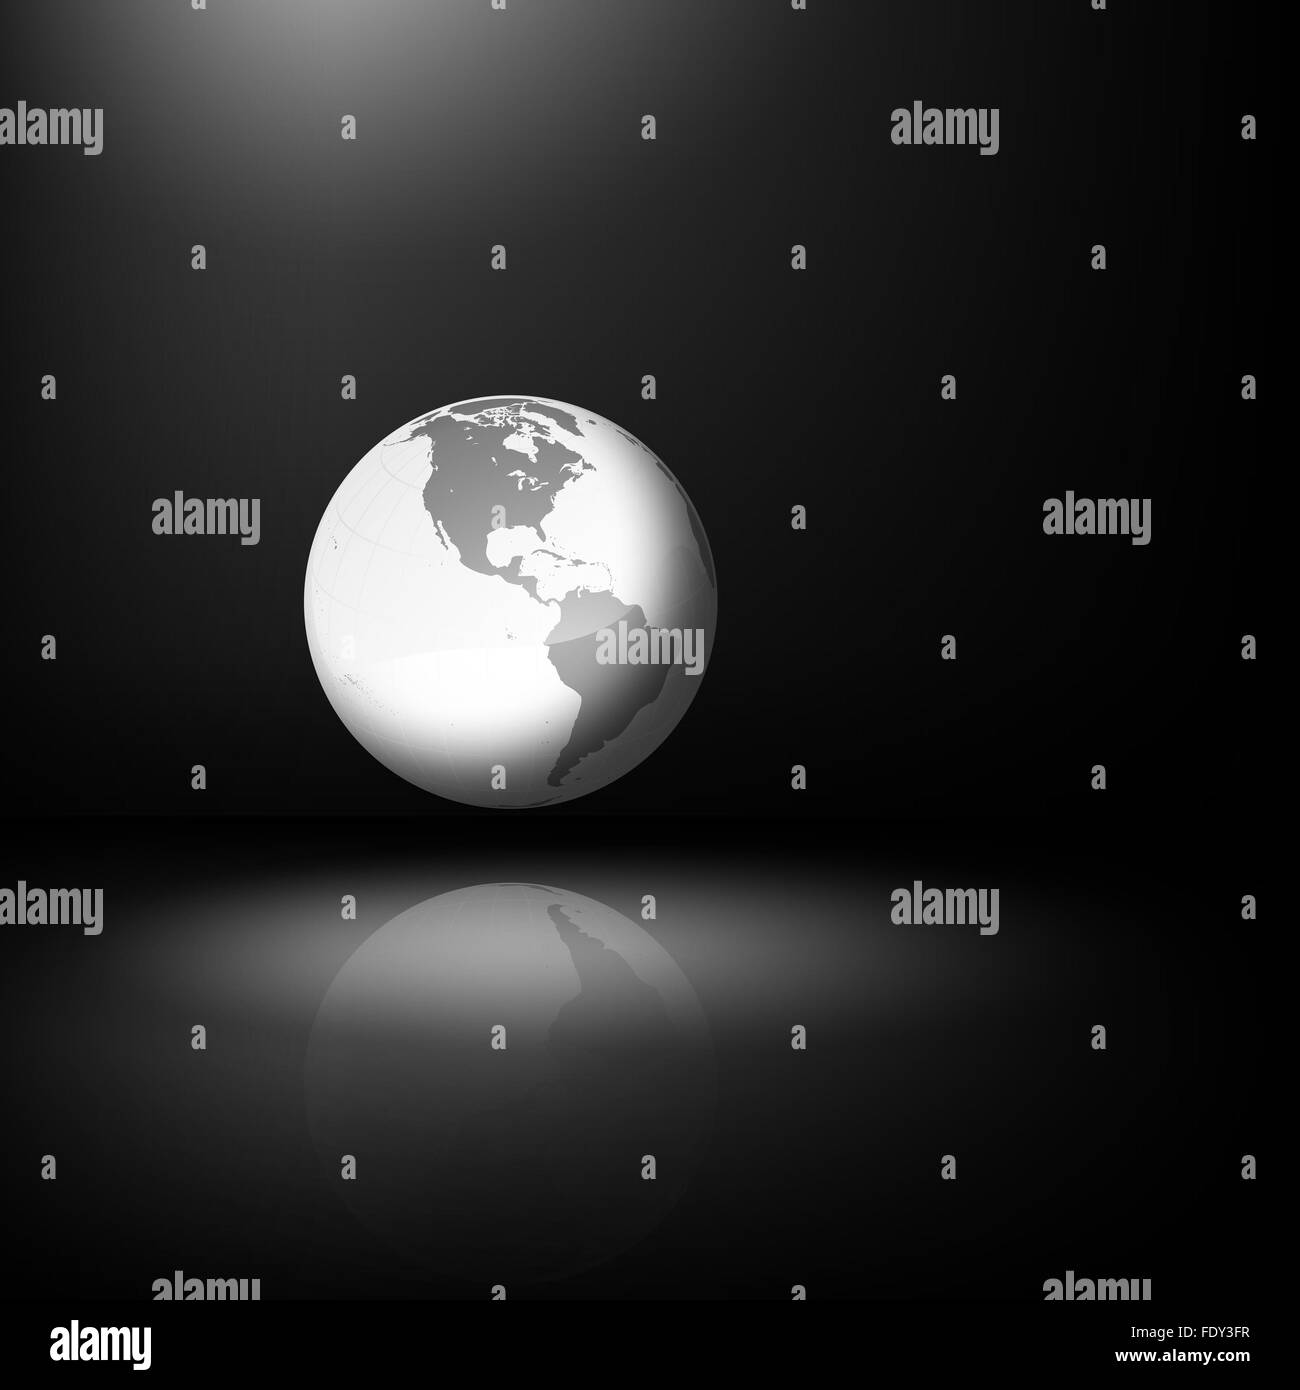 Abstract background - a reflection of a world map on the shiny surface Stock Photo